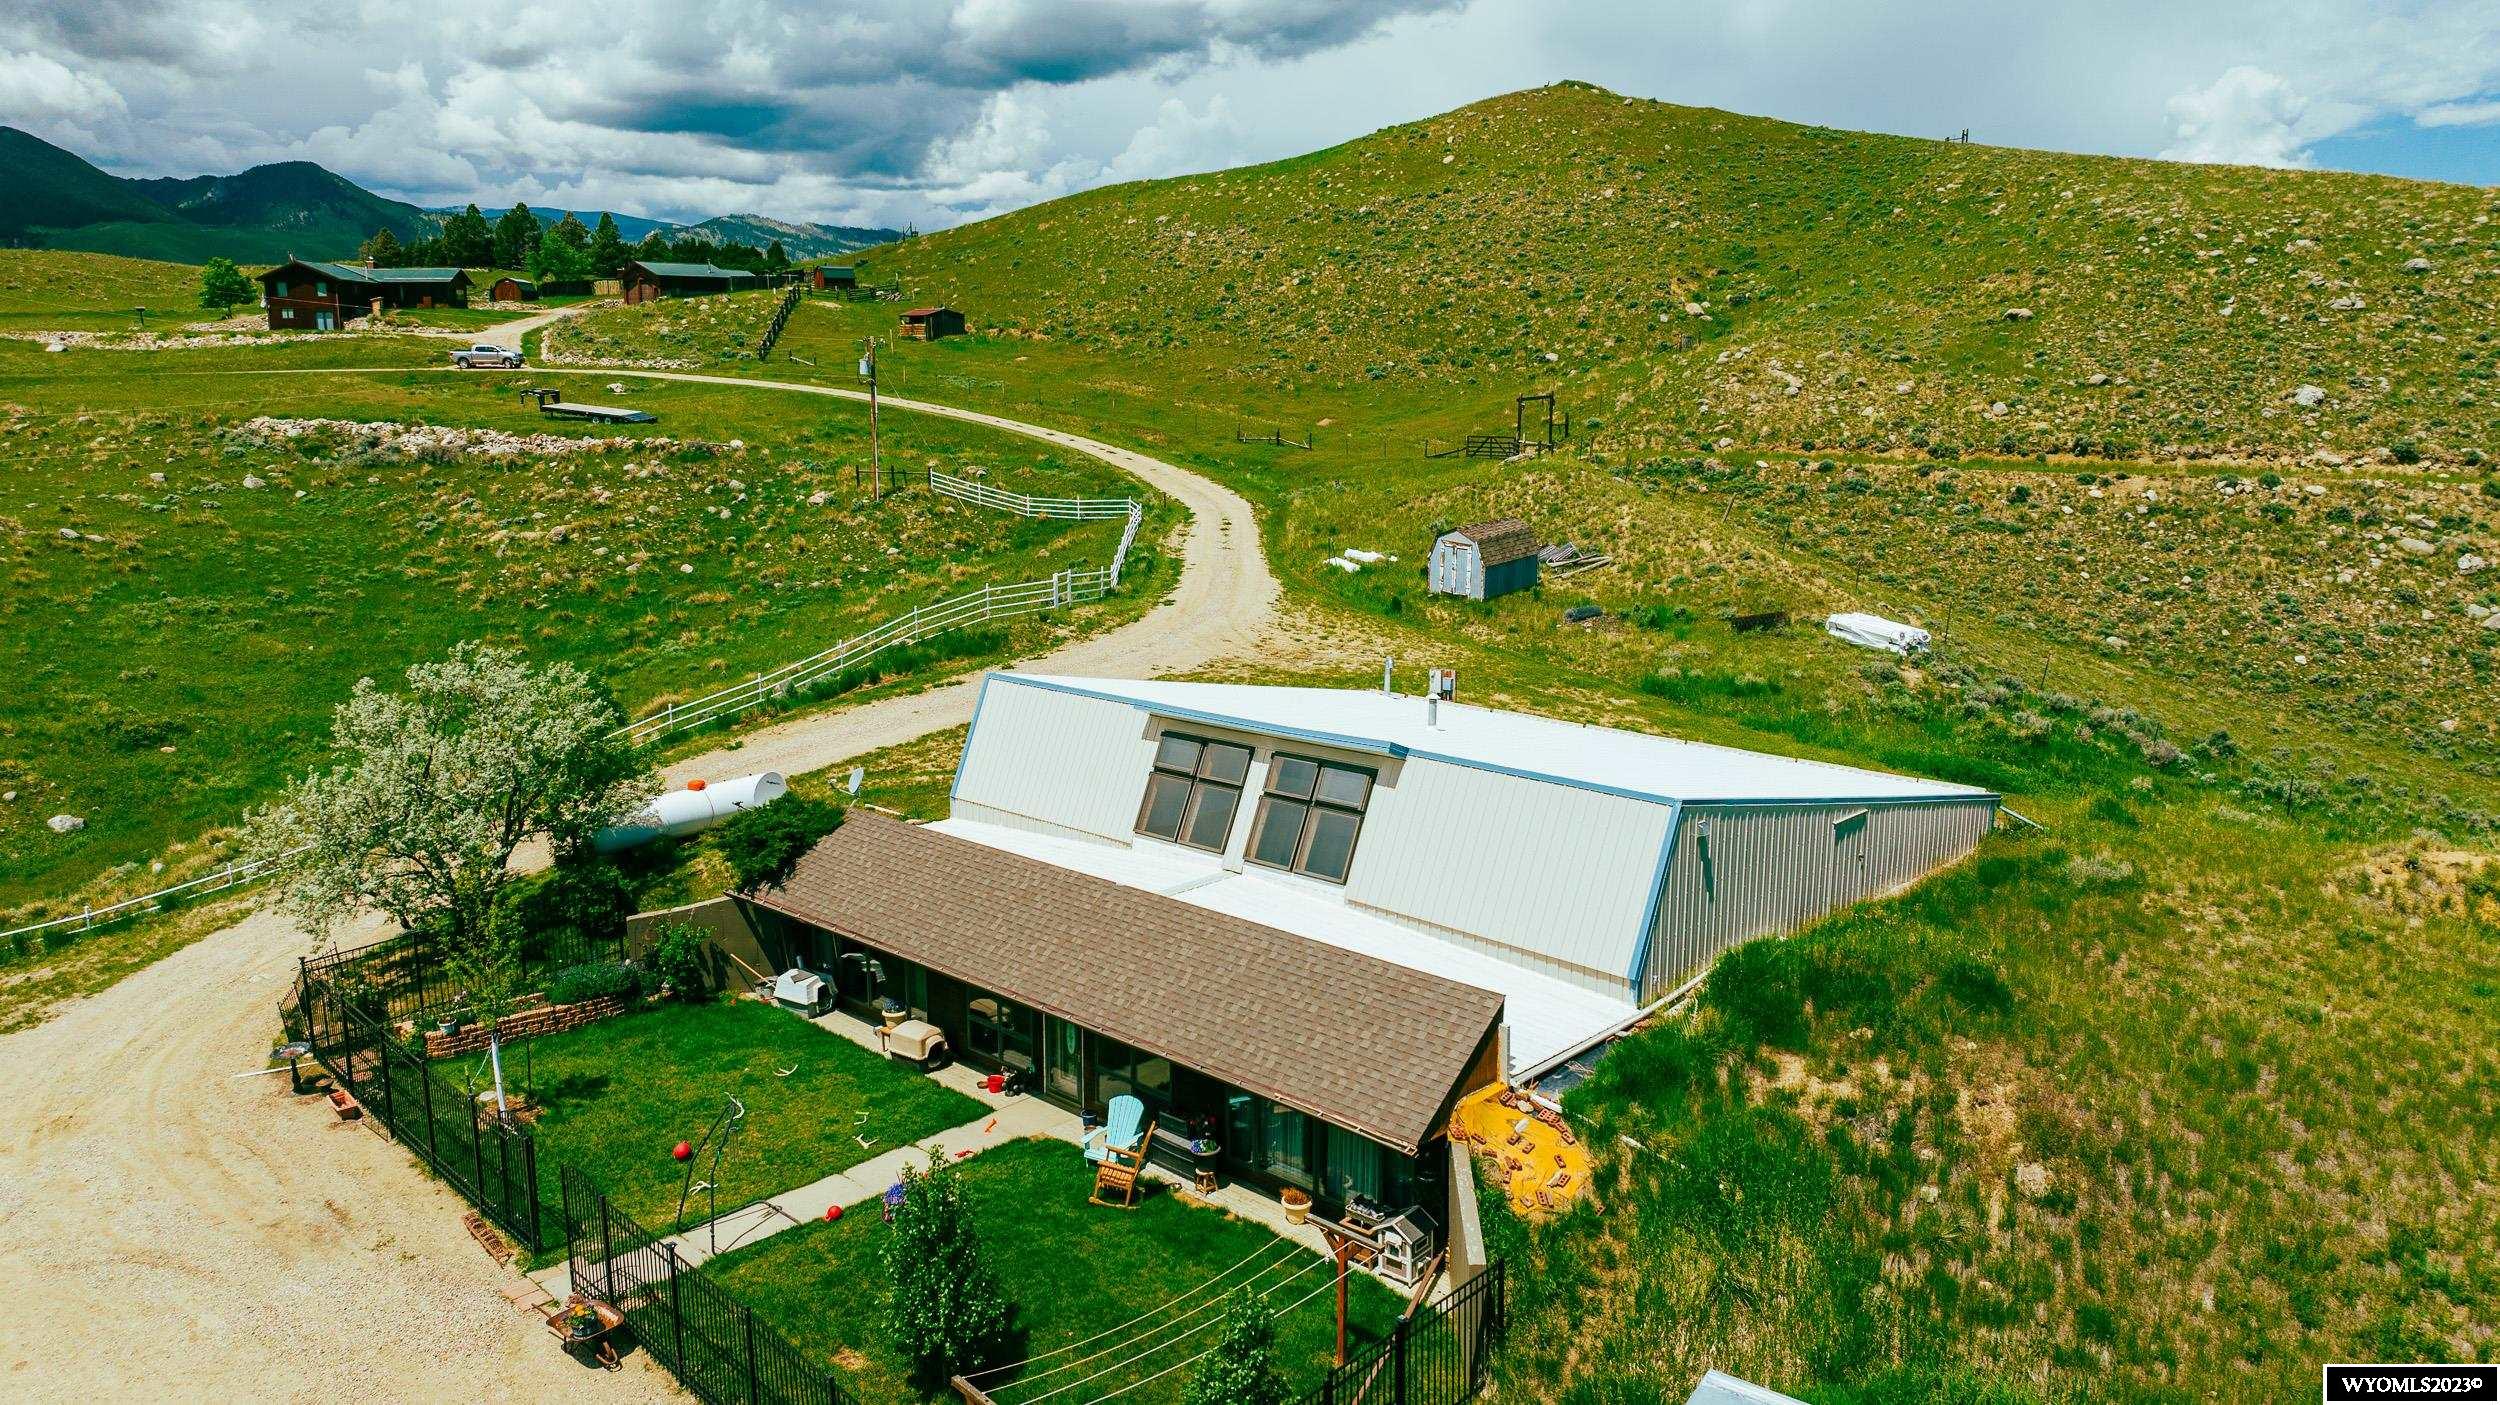 Beautiful solar home w/ app. 3132 sq. ft. of living space in the country with breath taking views of the Bighorn Mountains & valleys.  This home has 3 bedrooms & 1.5 baths. Large master bedroom suite w/ a 1/2 bath but the drain is there to add a shower if you wish. Large sun room to grow your vegetables & plants. Large spacious kitchen w/dining area. Formal living room, separate office or family room area. Utilities run next to nothing due to the solar design. Access to 3000 plus square ft. of storage above main floor of the home with outside access. Wrought iron fenced in yard in front that is well landscaped. Small reservoir on the property  below the house.  End of the road an private location.  Antique medicine cabinet in the master bath does not stay with the sale of the property.  Stop by and view this home with Cristy Kinghorn 307-620-0037